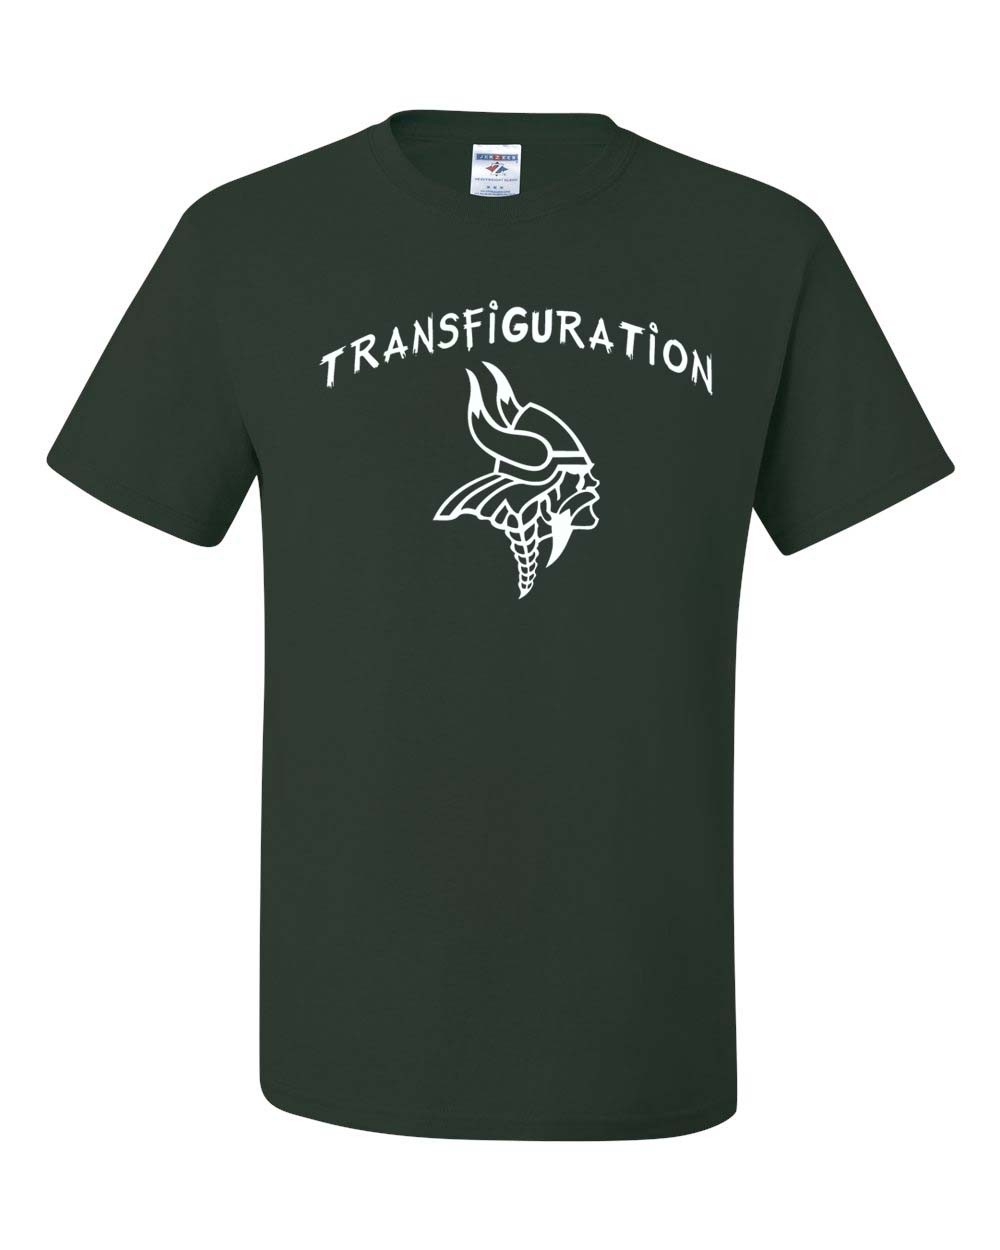 Transfiguration S/S Green Gym T-Shirt w/ School Logo *sale price in stock only